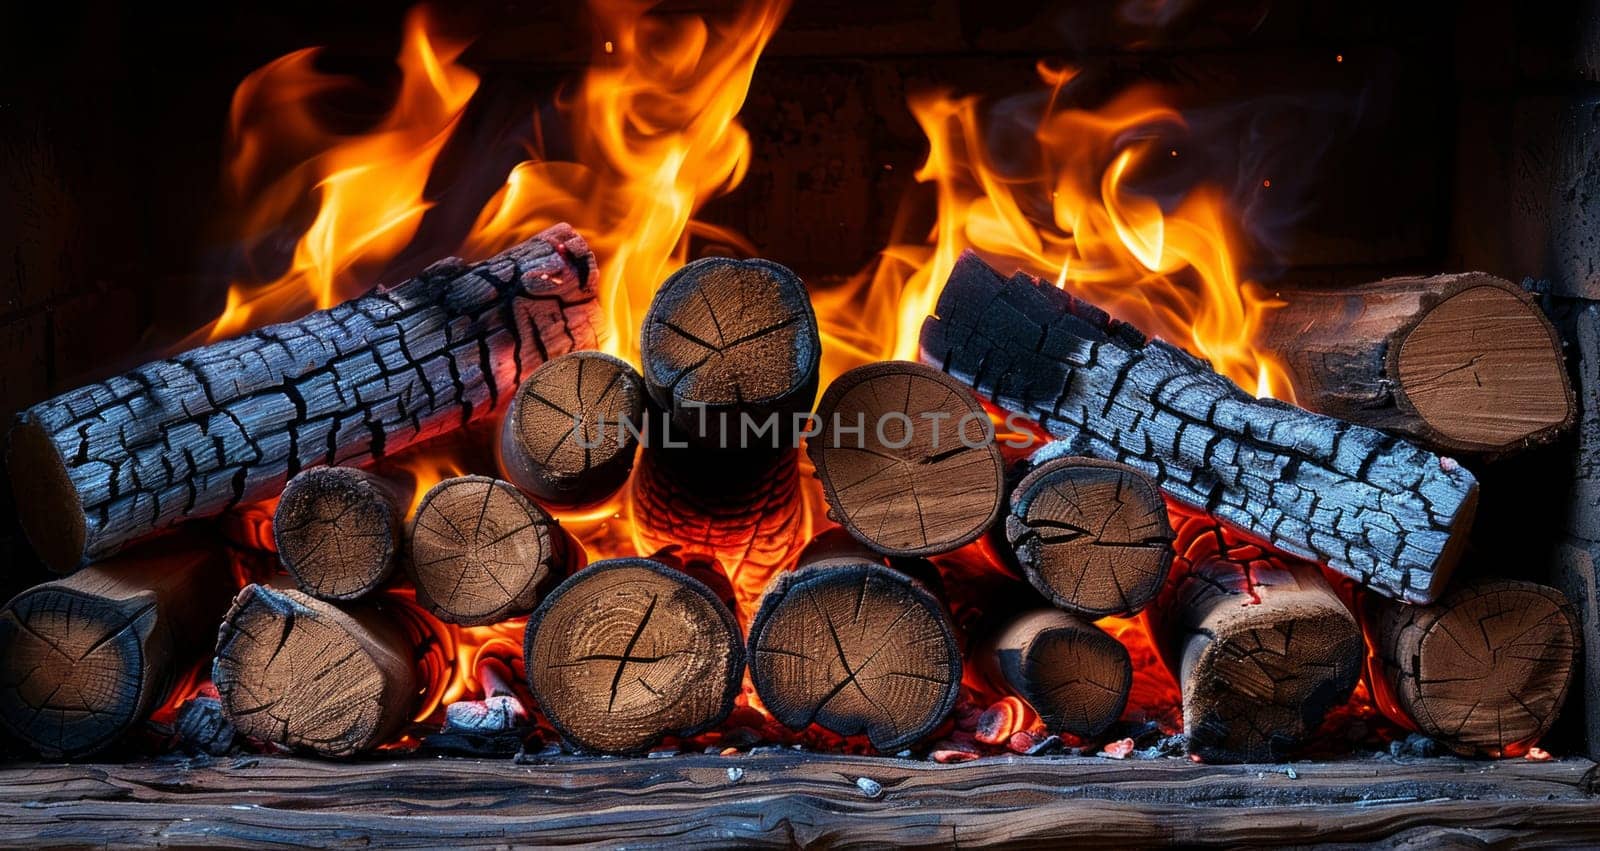 The firewood is burning by papatonic